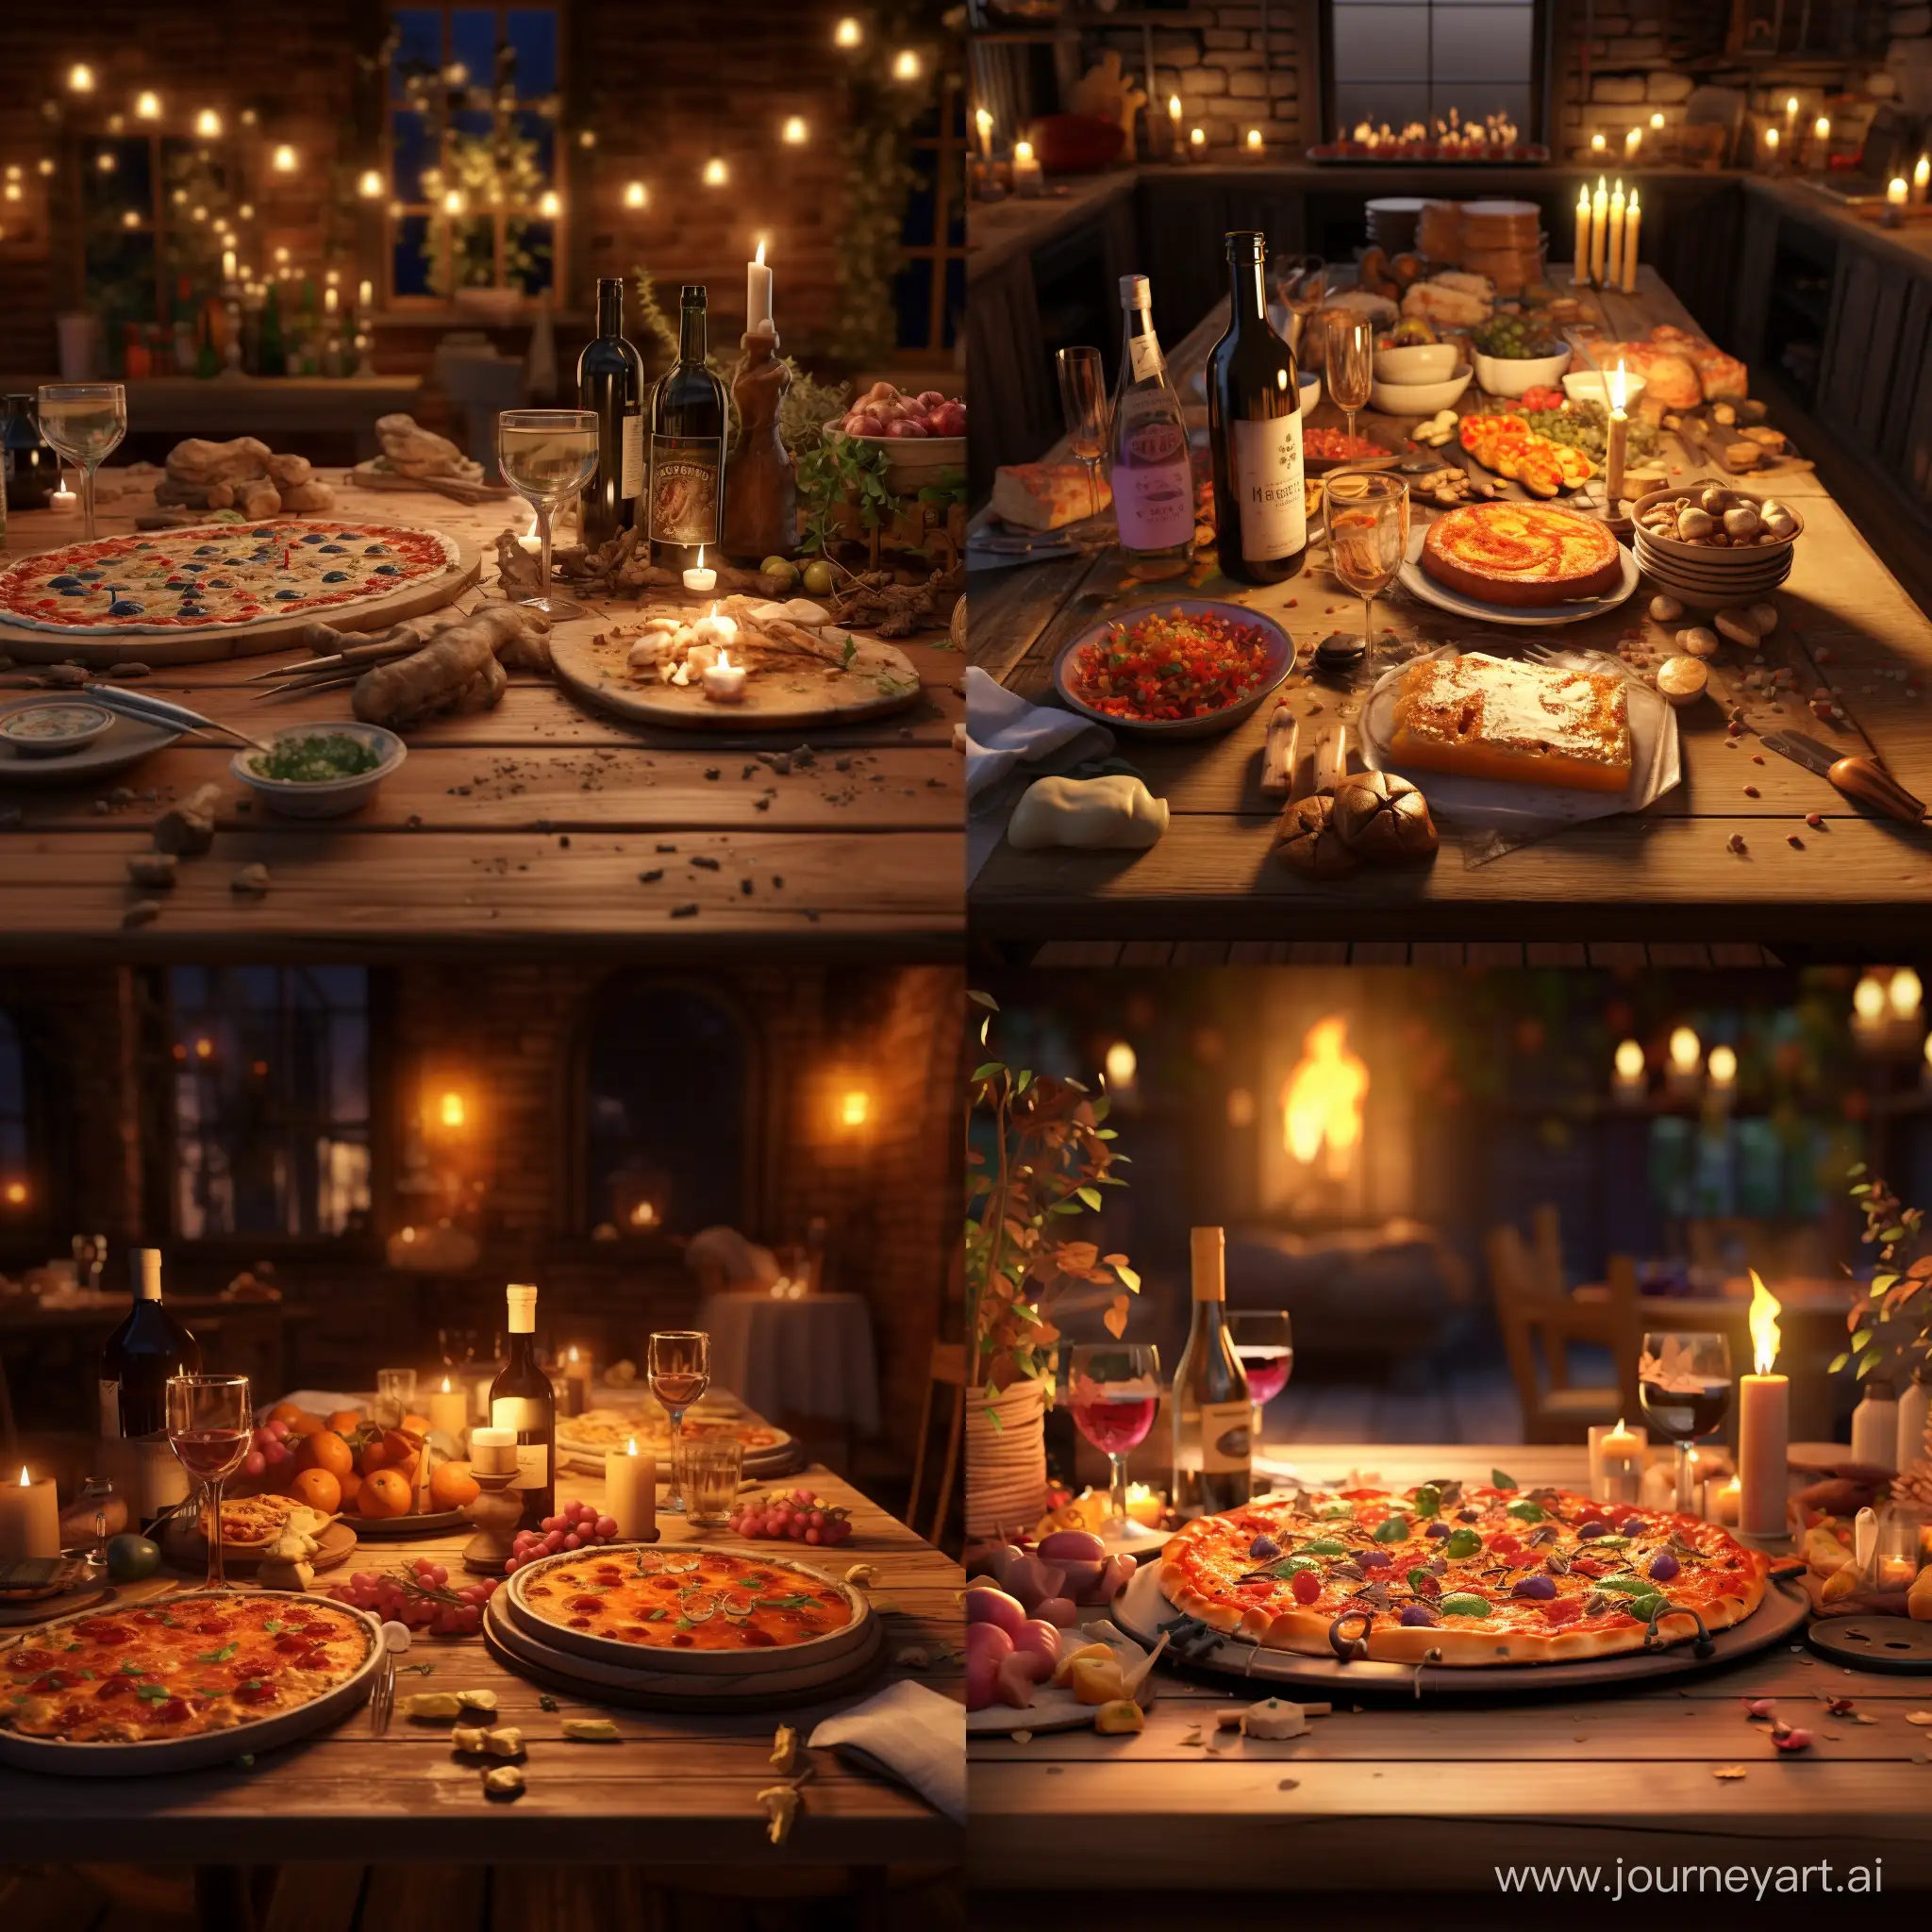 Bountiful-Pizza-Feast-with-Elegant-Ambiance